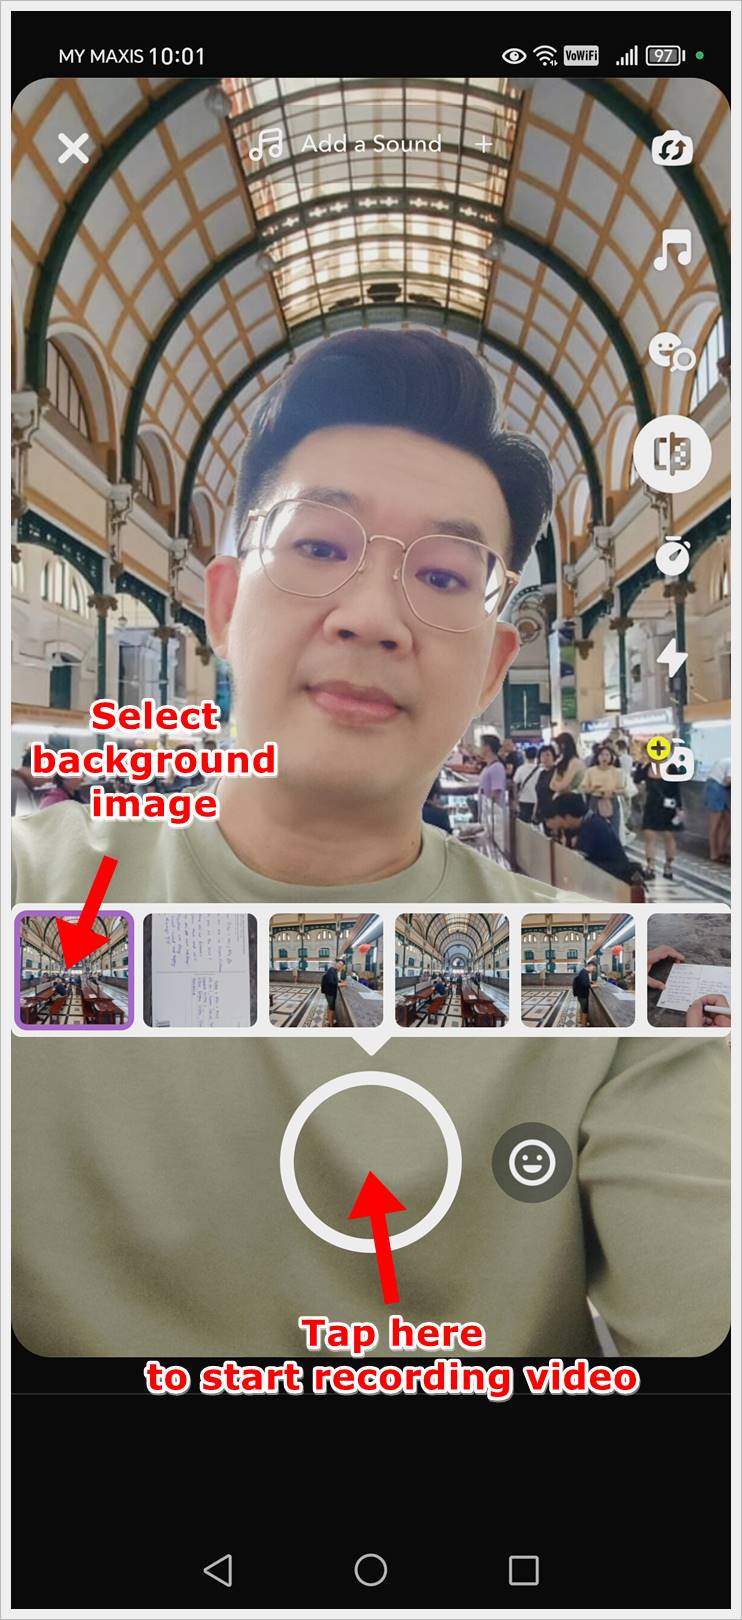 This mobile screenshot displays Snapchat's Director Mode, where you can select a background image from your device's gallery before proceeding to record the video.